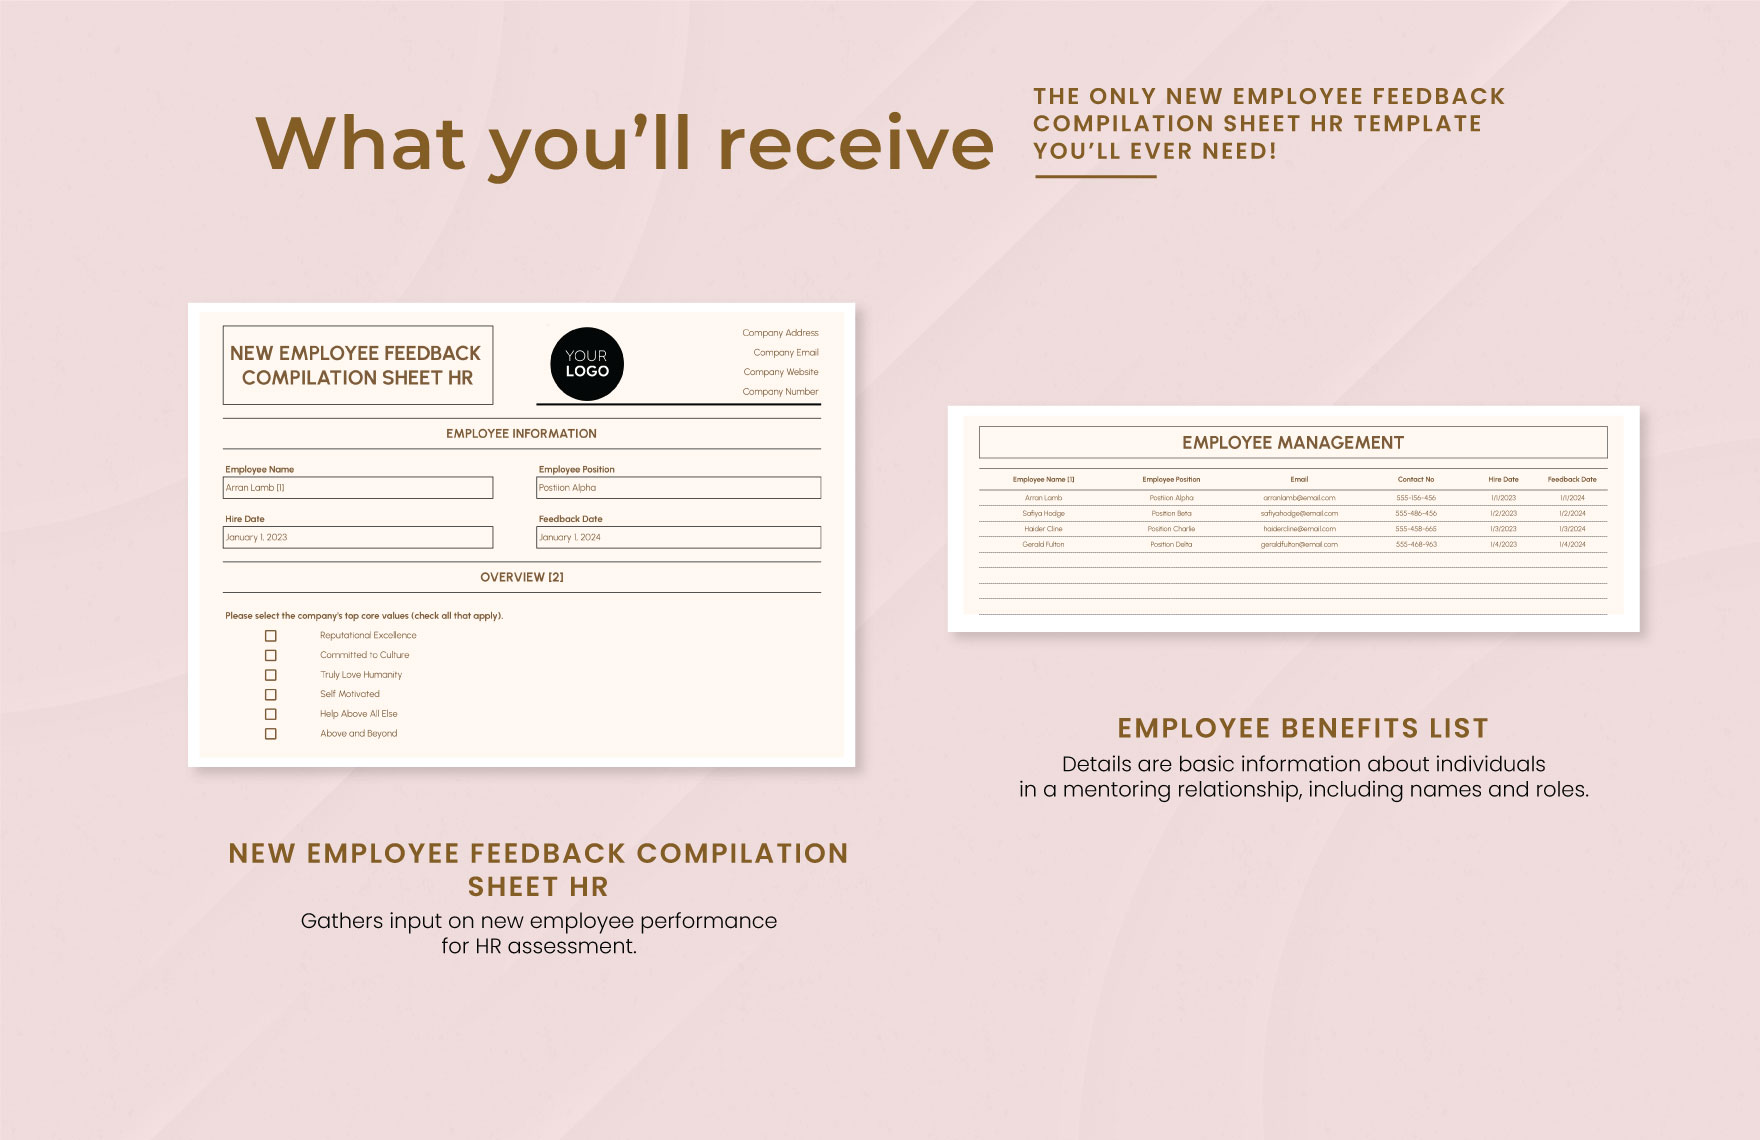 New Employee Feedback Compilation Sheet HR Template